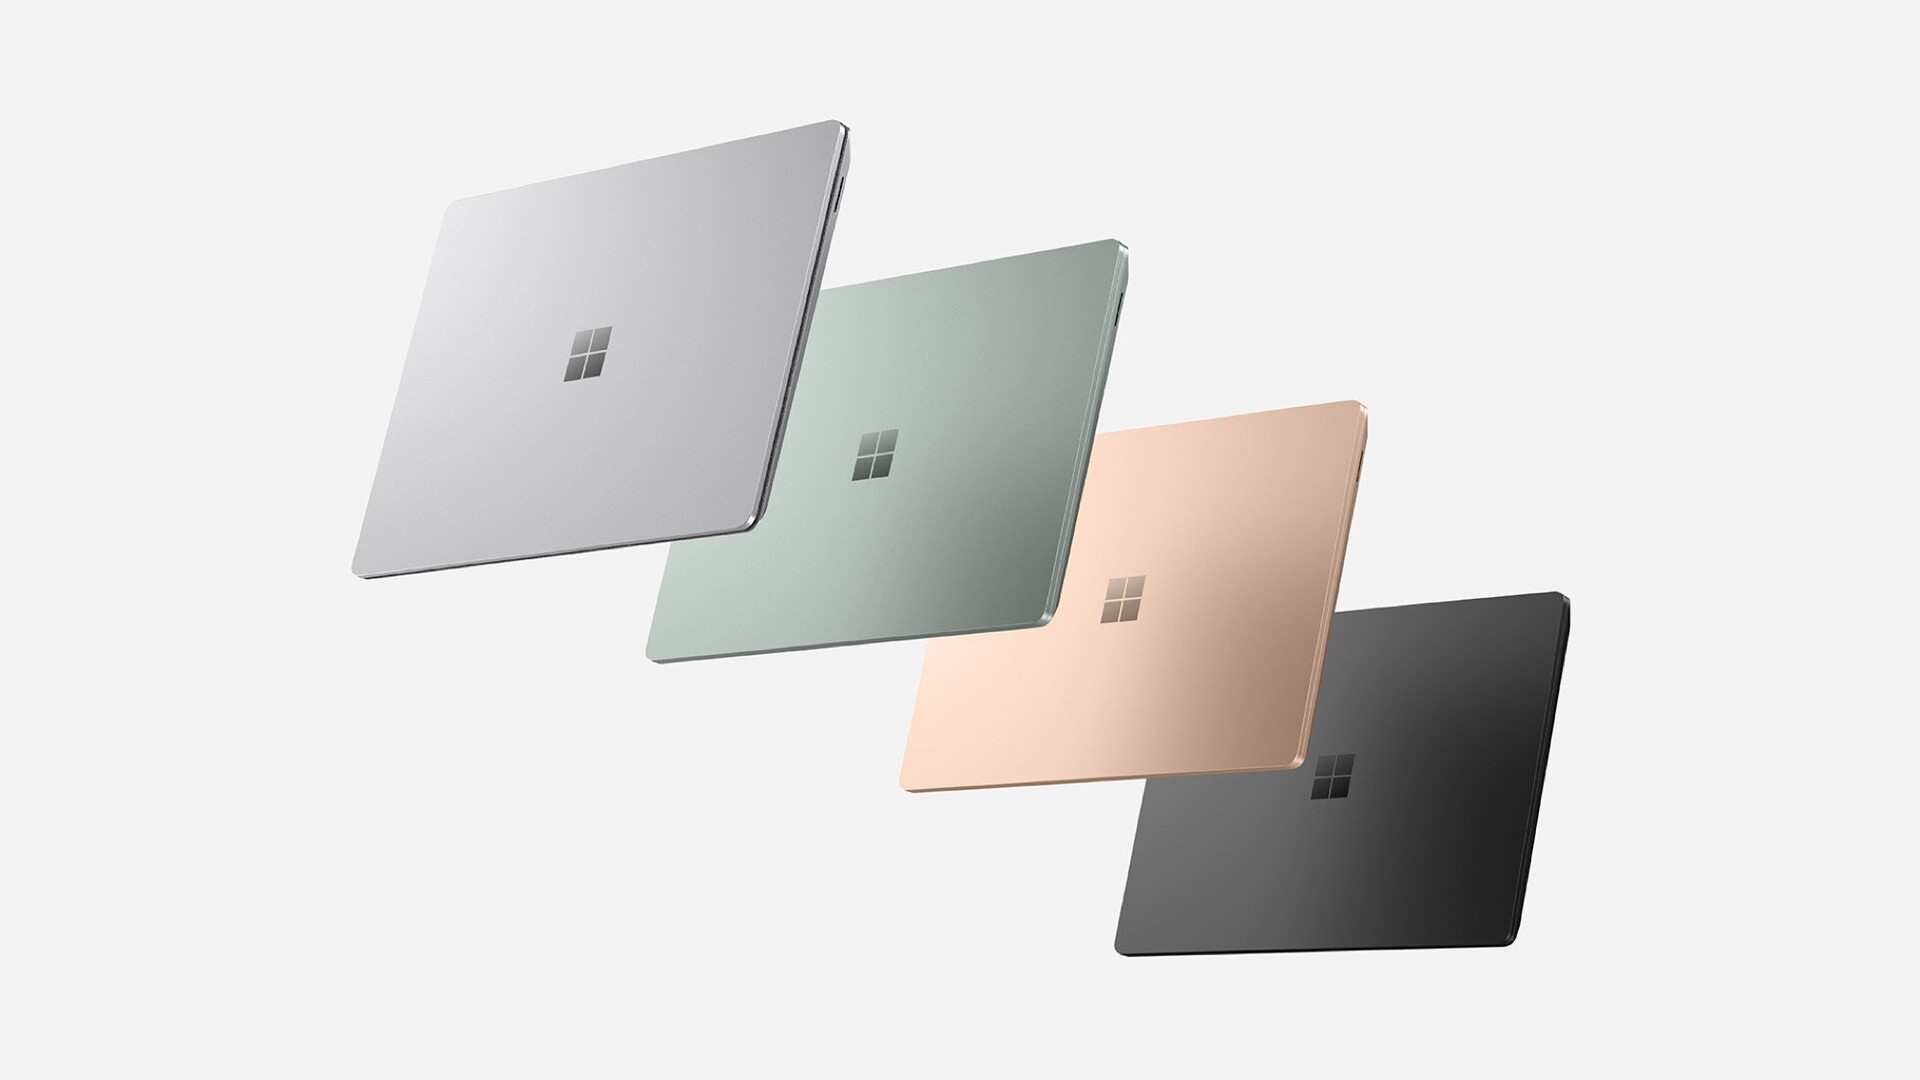 Microsoft refreshes Surface Laptop 13.5-inch and 15-inch models